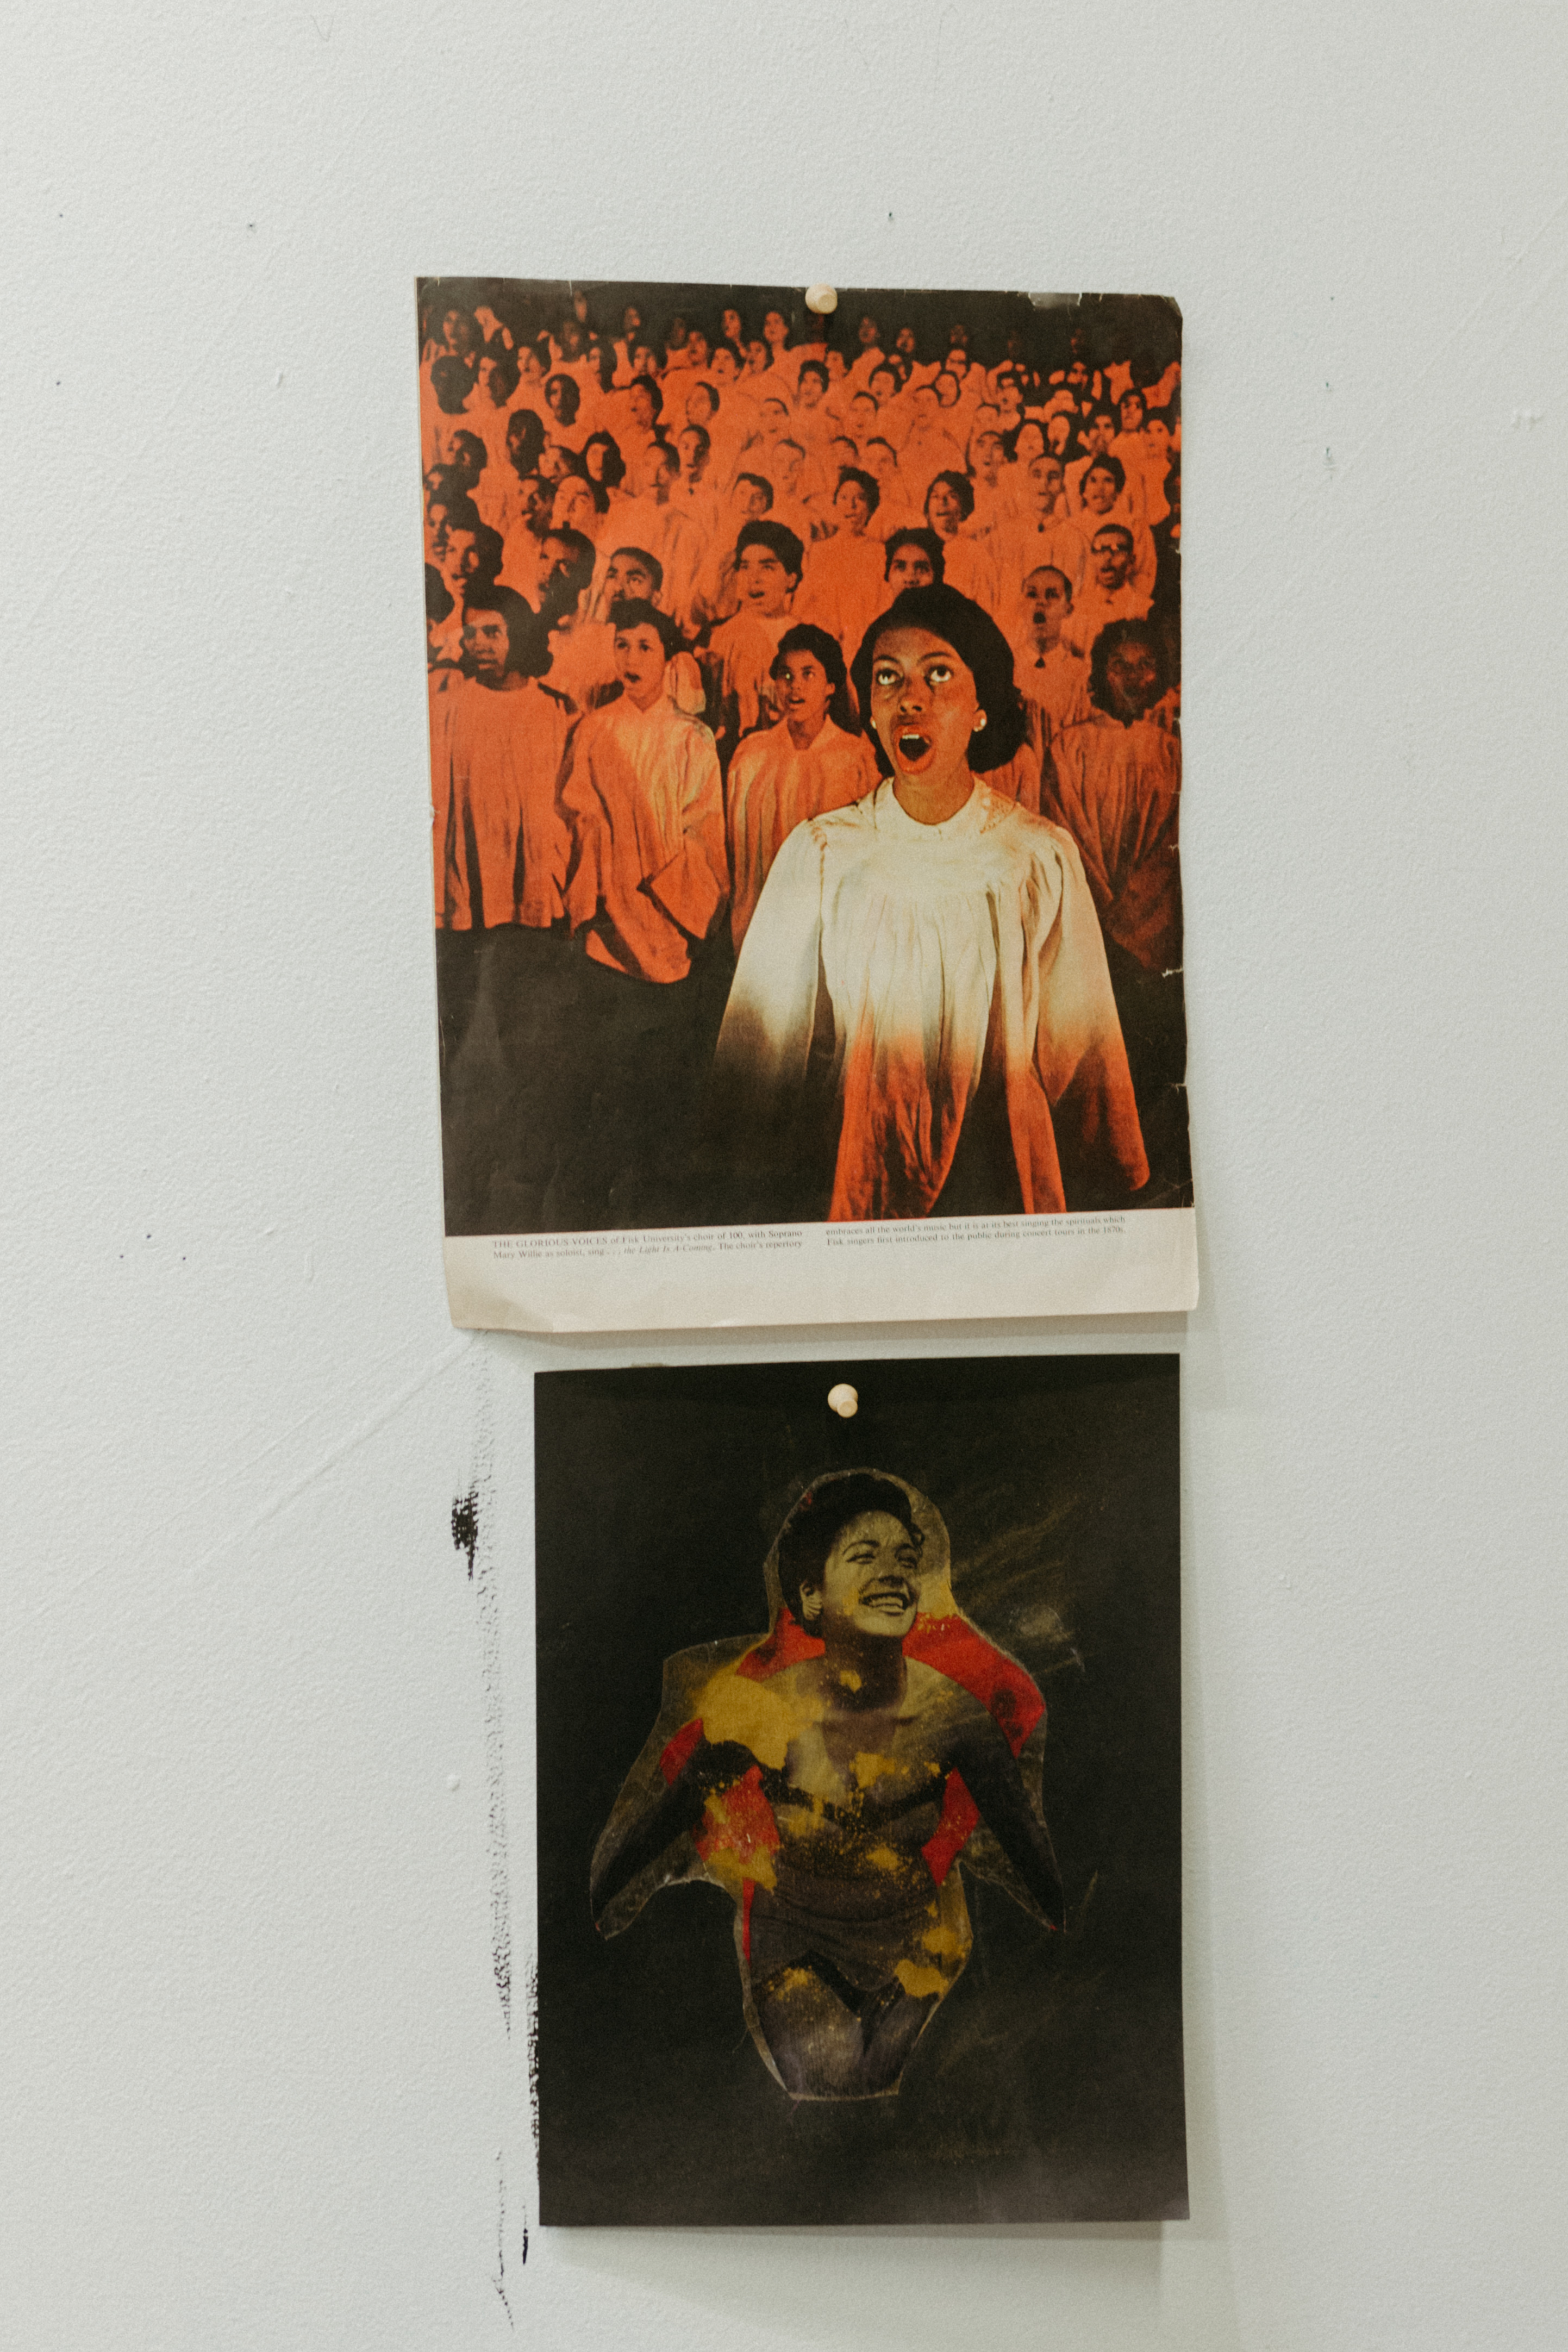 Photographs on the wall of Anthony's studio. One is of several people in a choir, a woman is front and center wearing a white dress singing. The other image is of a smiling woman. 